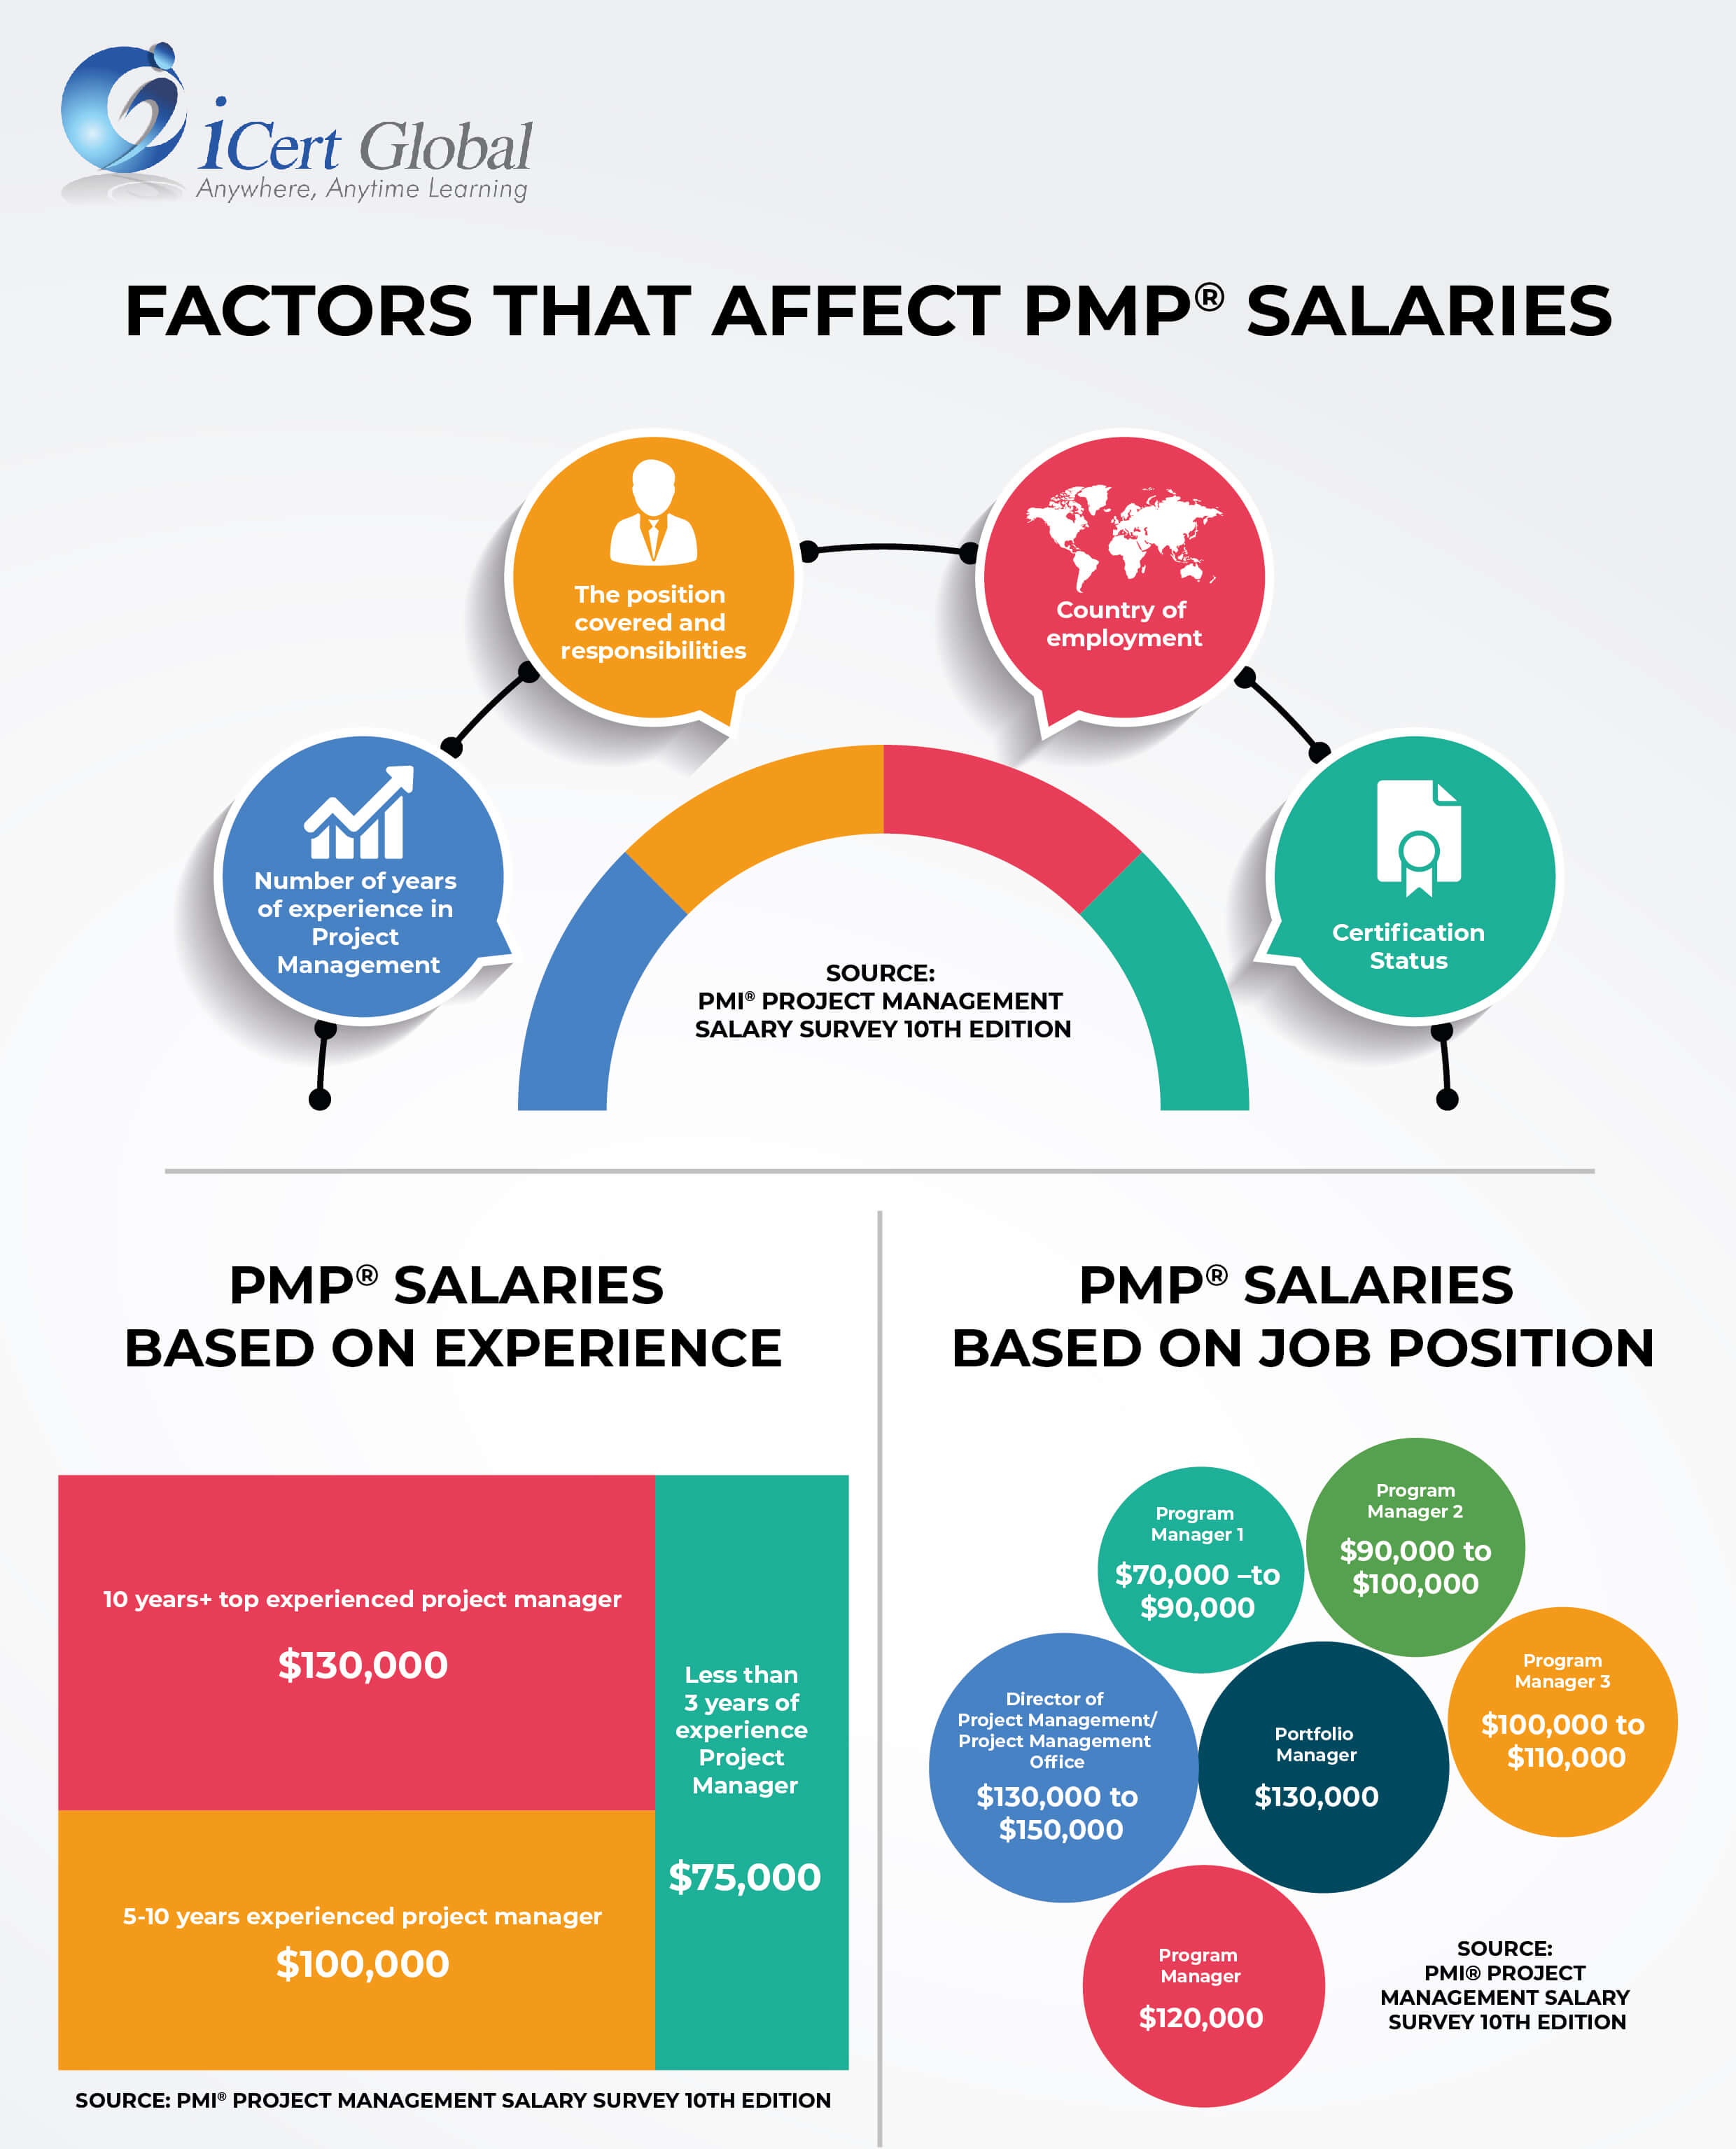 pmp certification salary